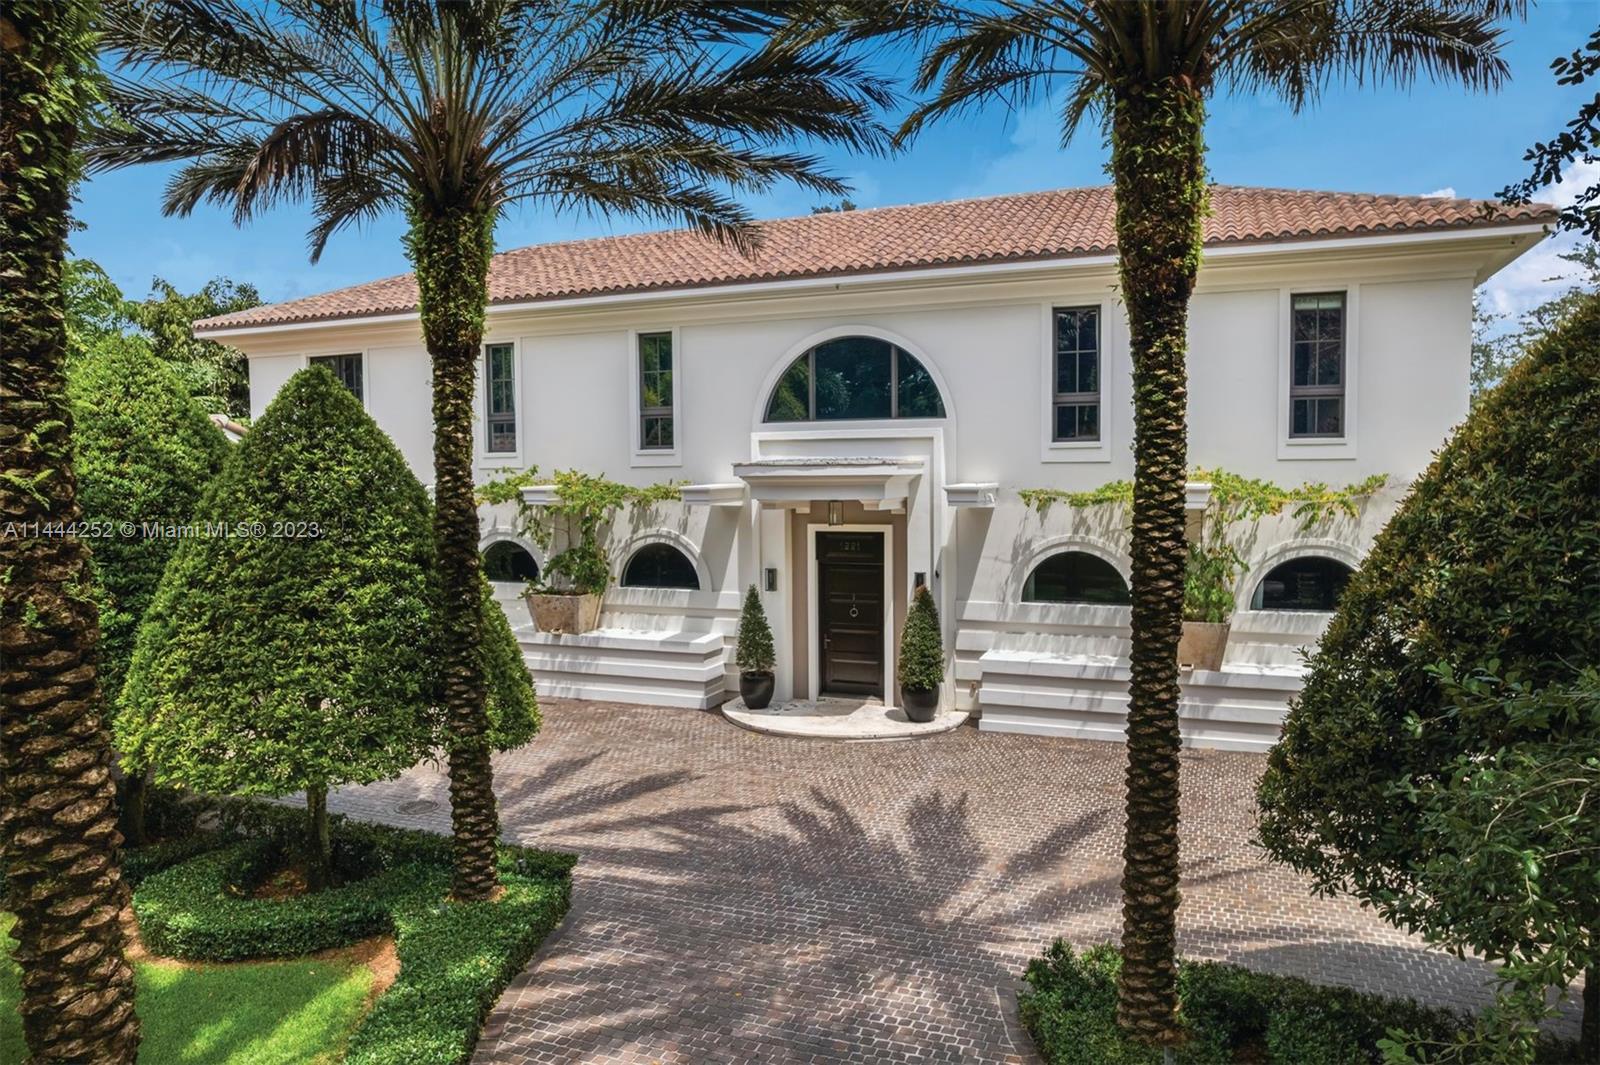 This exceptional 8,274 SF Coral Gables estate has 6 bedrooms and 5.5 bathrooms, on an expansive 20,739 SF lot with stunning uninterrupted views of the Biltmore Golf Course and the Biltmore Hotel. Every detail of the home was meticulously designed and carefully selected. The chef's kitchen includes luxury appliances, and custom floor-to-ceiling cabinetry. An open layout offers volume ceilings, impact windows & doors, and sizeable rooms. Outdoor entertainment areas include a summer kitchen, heated saltwater pool, and covered terraces with sweeping views of the golf course. Additional features include a 2-car garage, Creston audio system, and an 85kW generator. Minutes from MIA, Coconut Grove and top private schools. Incredible opportunity on an iconic street, in quintessential Coral Gables.